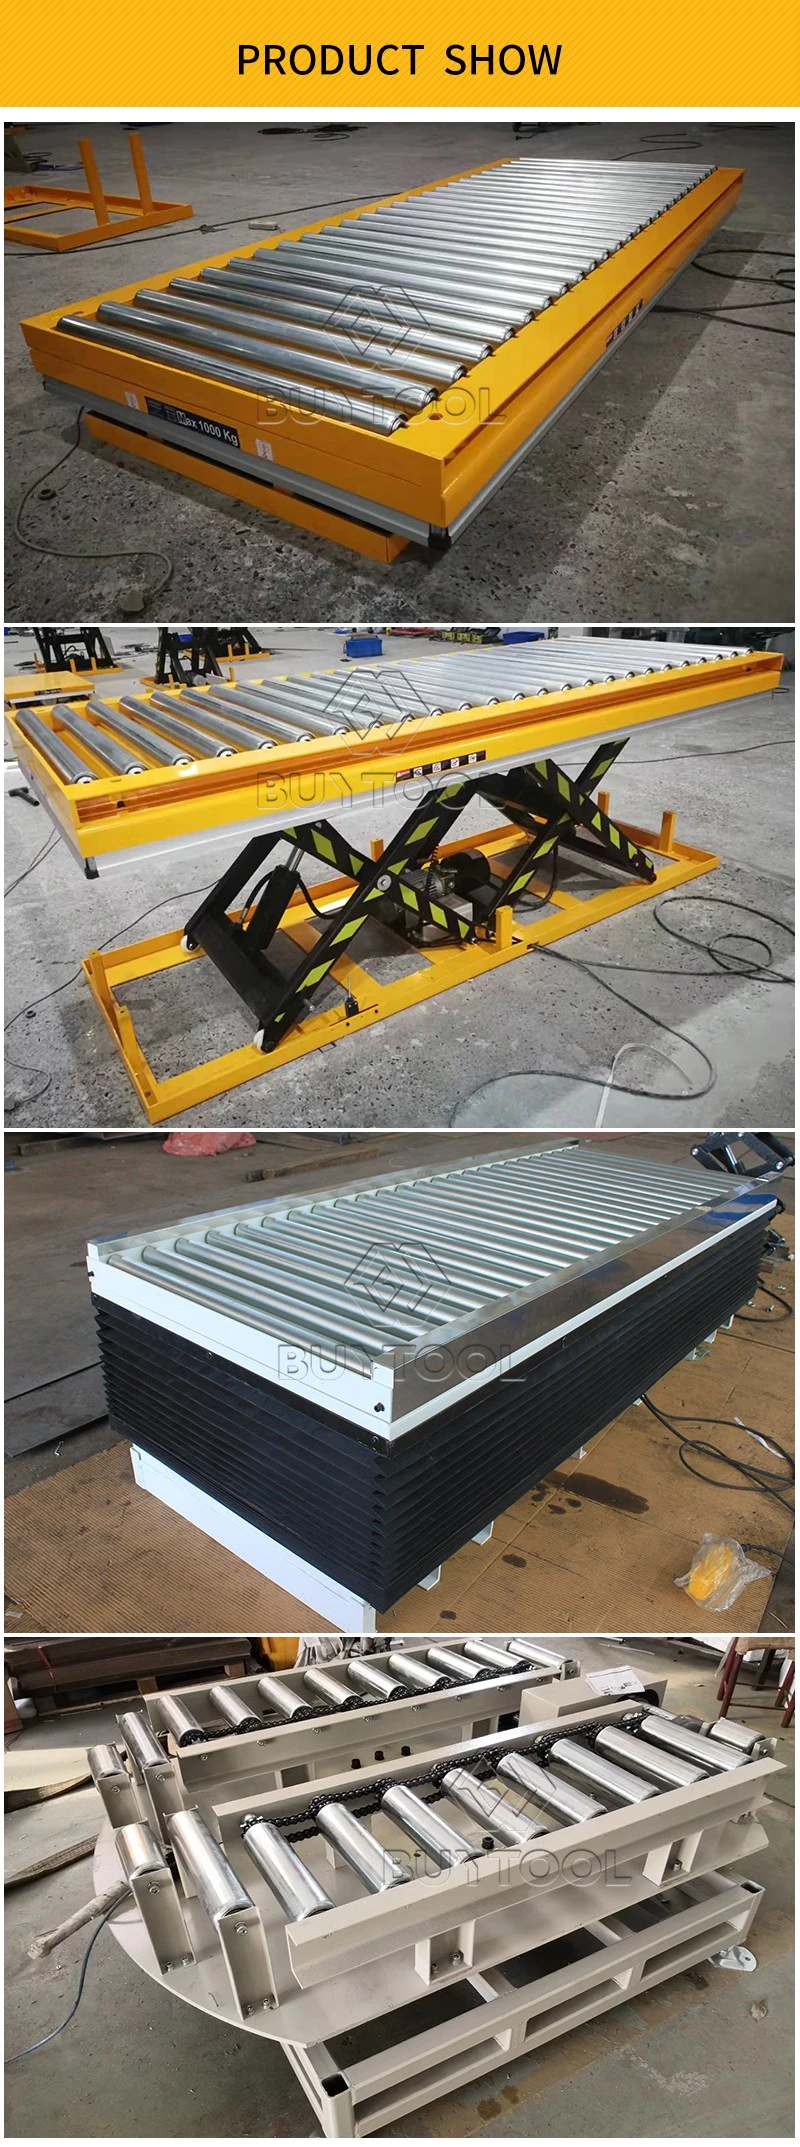 Special Electric Scissor Lift Table with Rollers Conveying and Protective Blind Desigined by Customer's Requirements